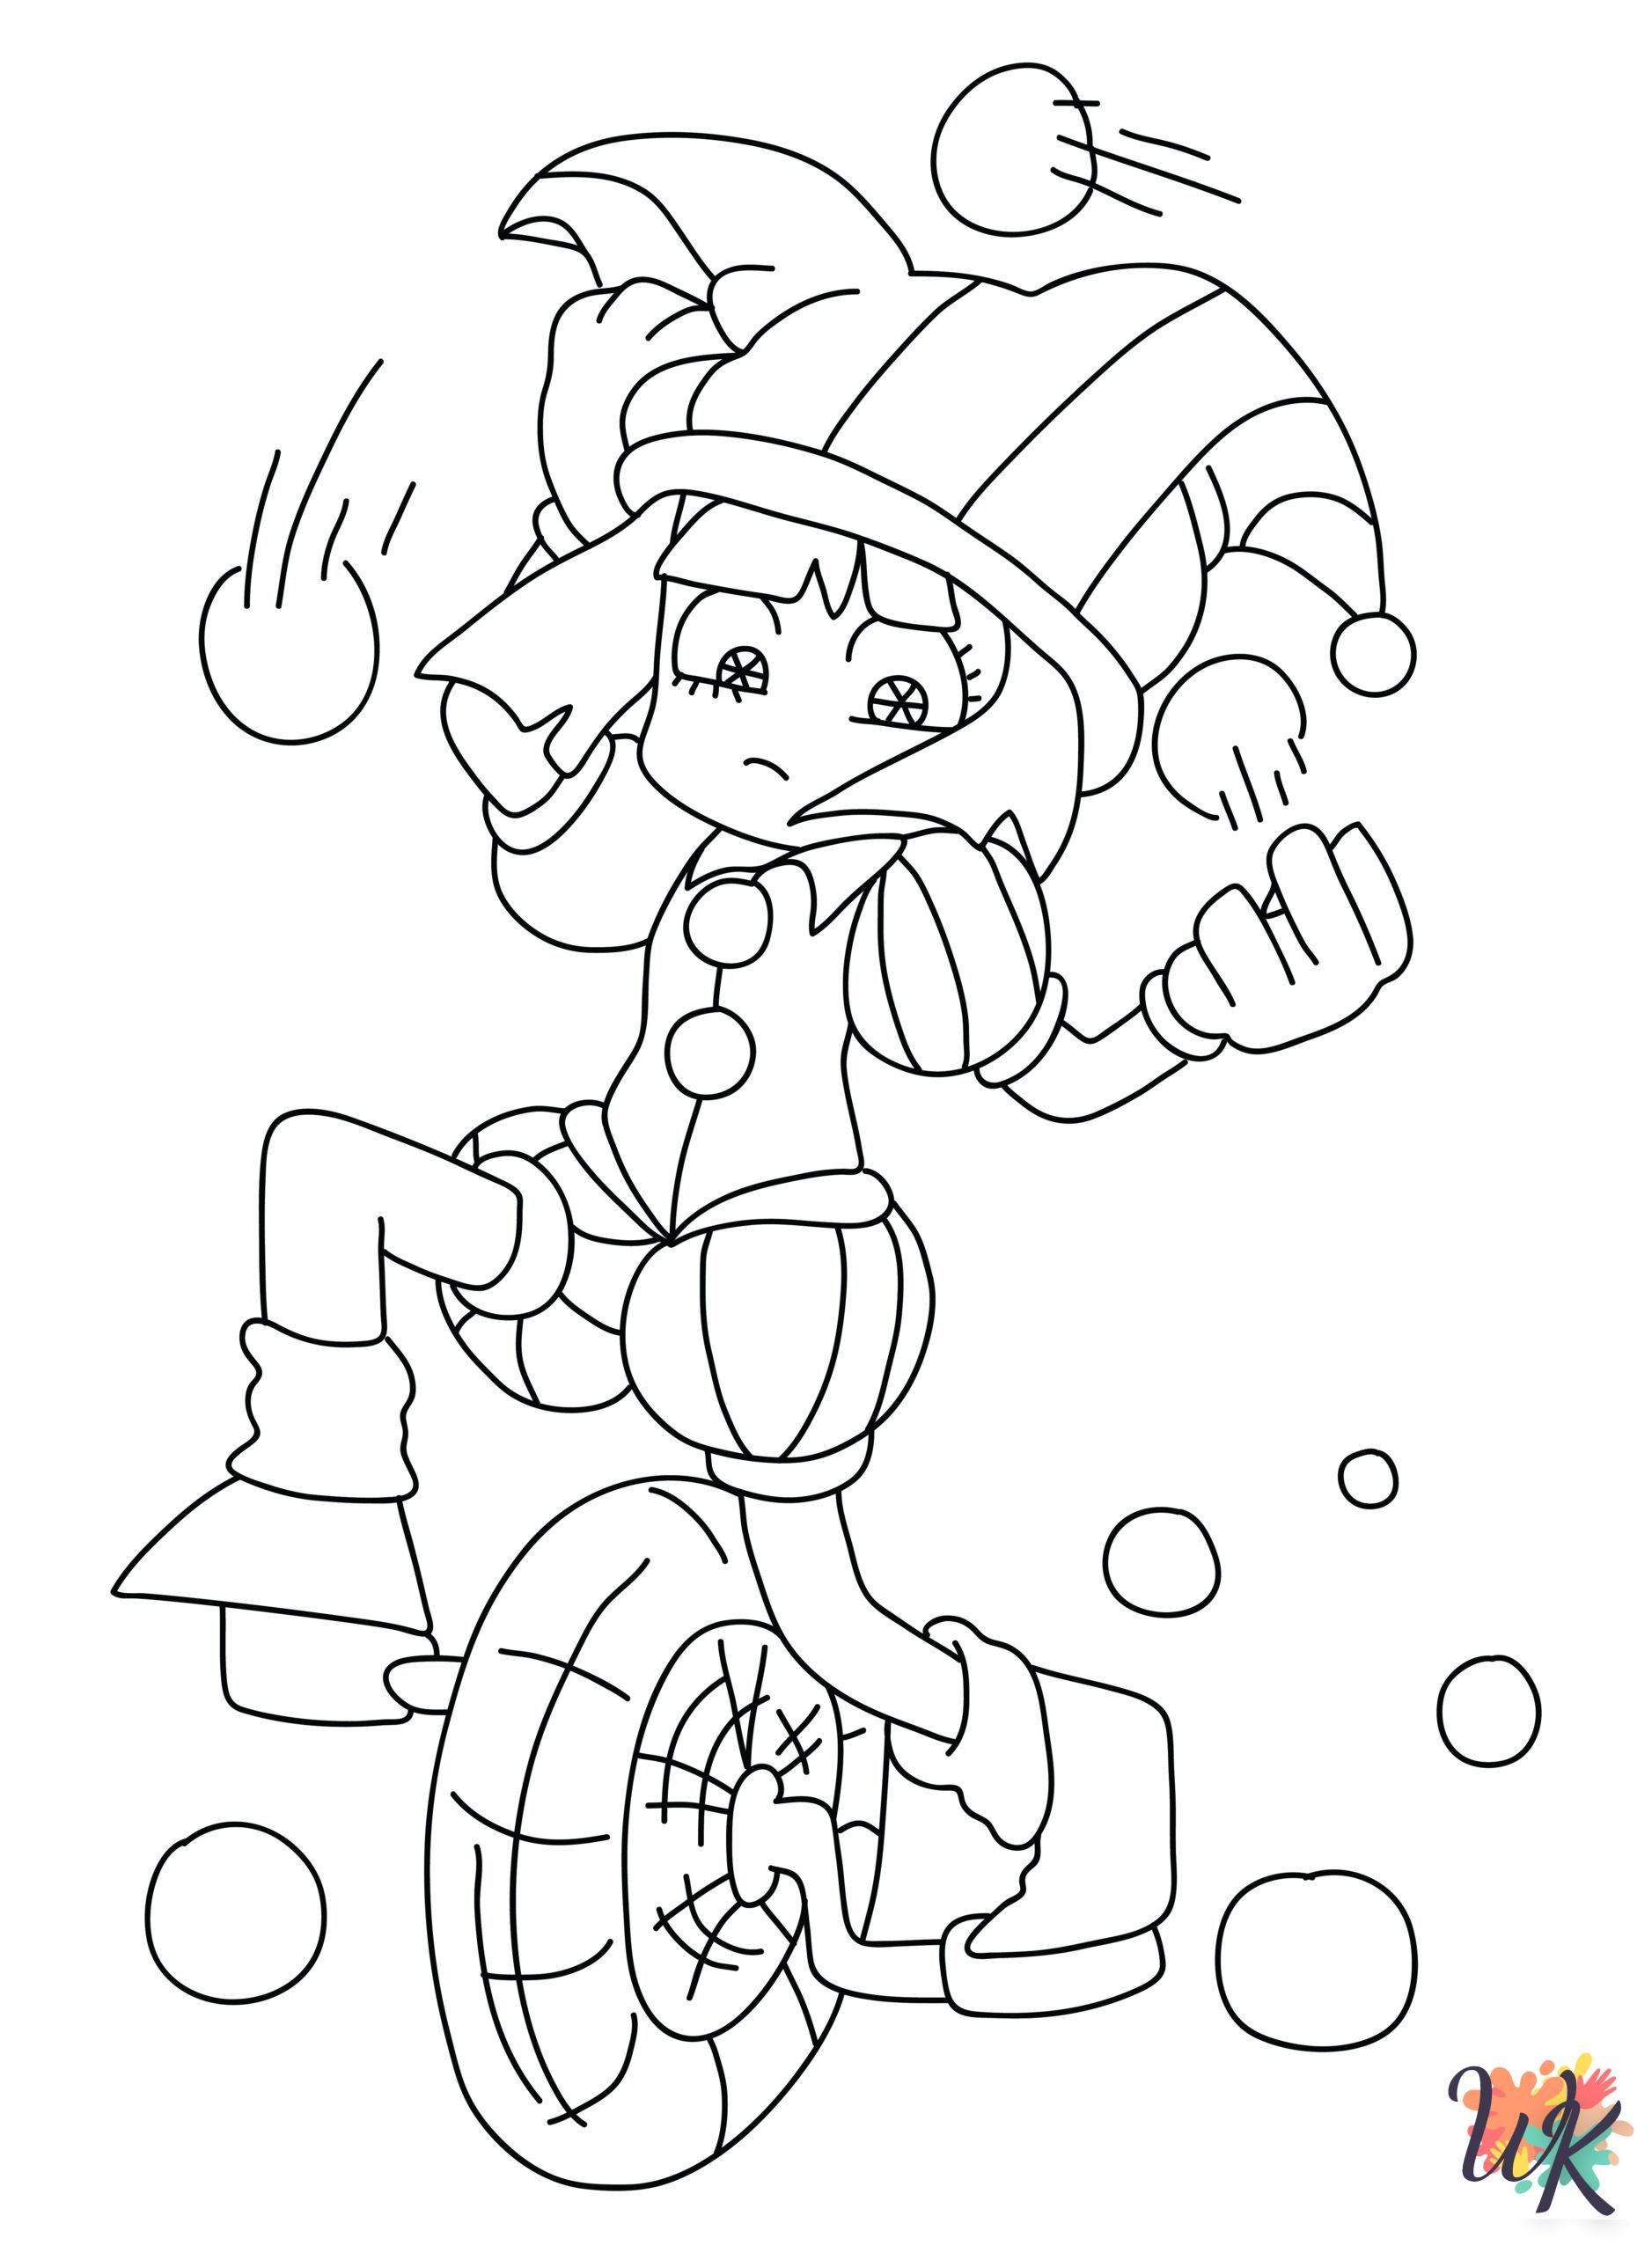 The Amazing Digital Circus coloring book pages